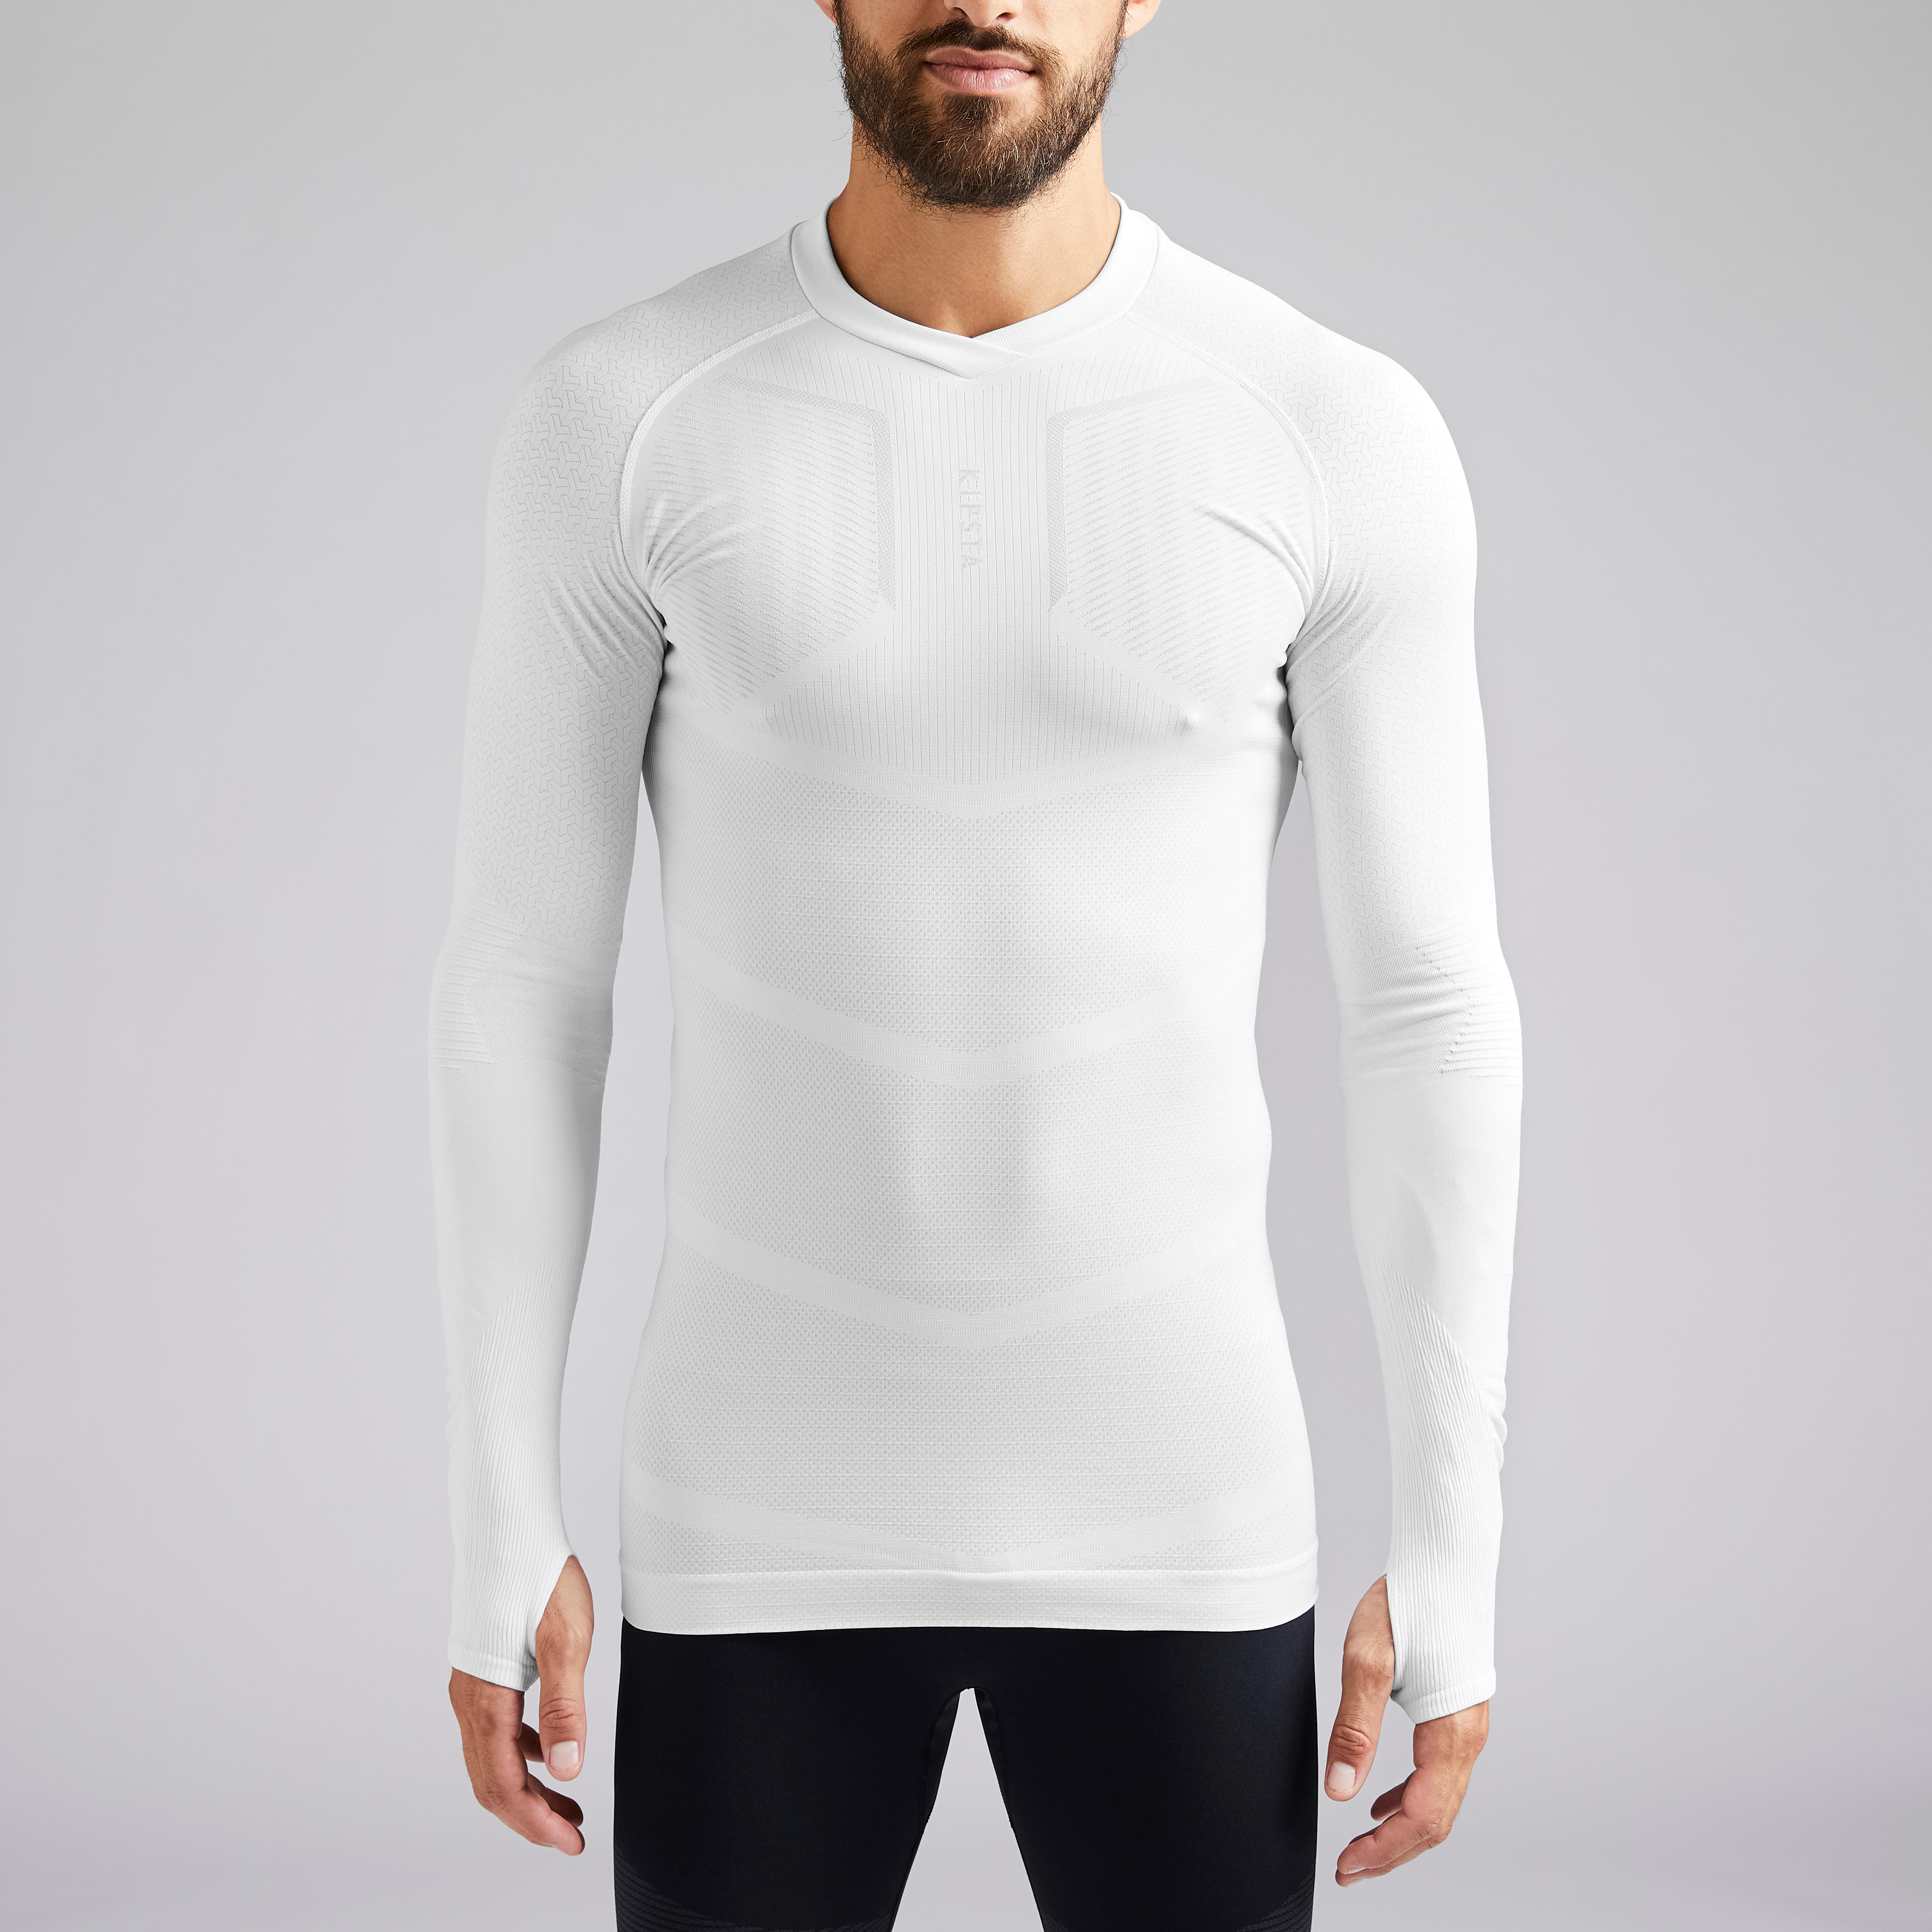 Keepdry 500 Adult Long-Sleeved Base Layer - White - S By KIPSTA | Decathlon